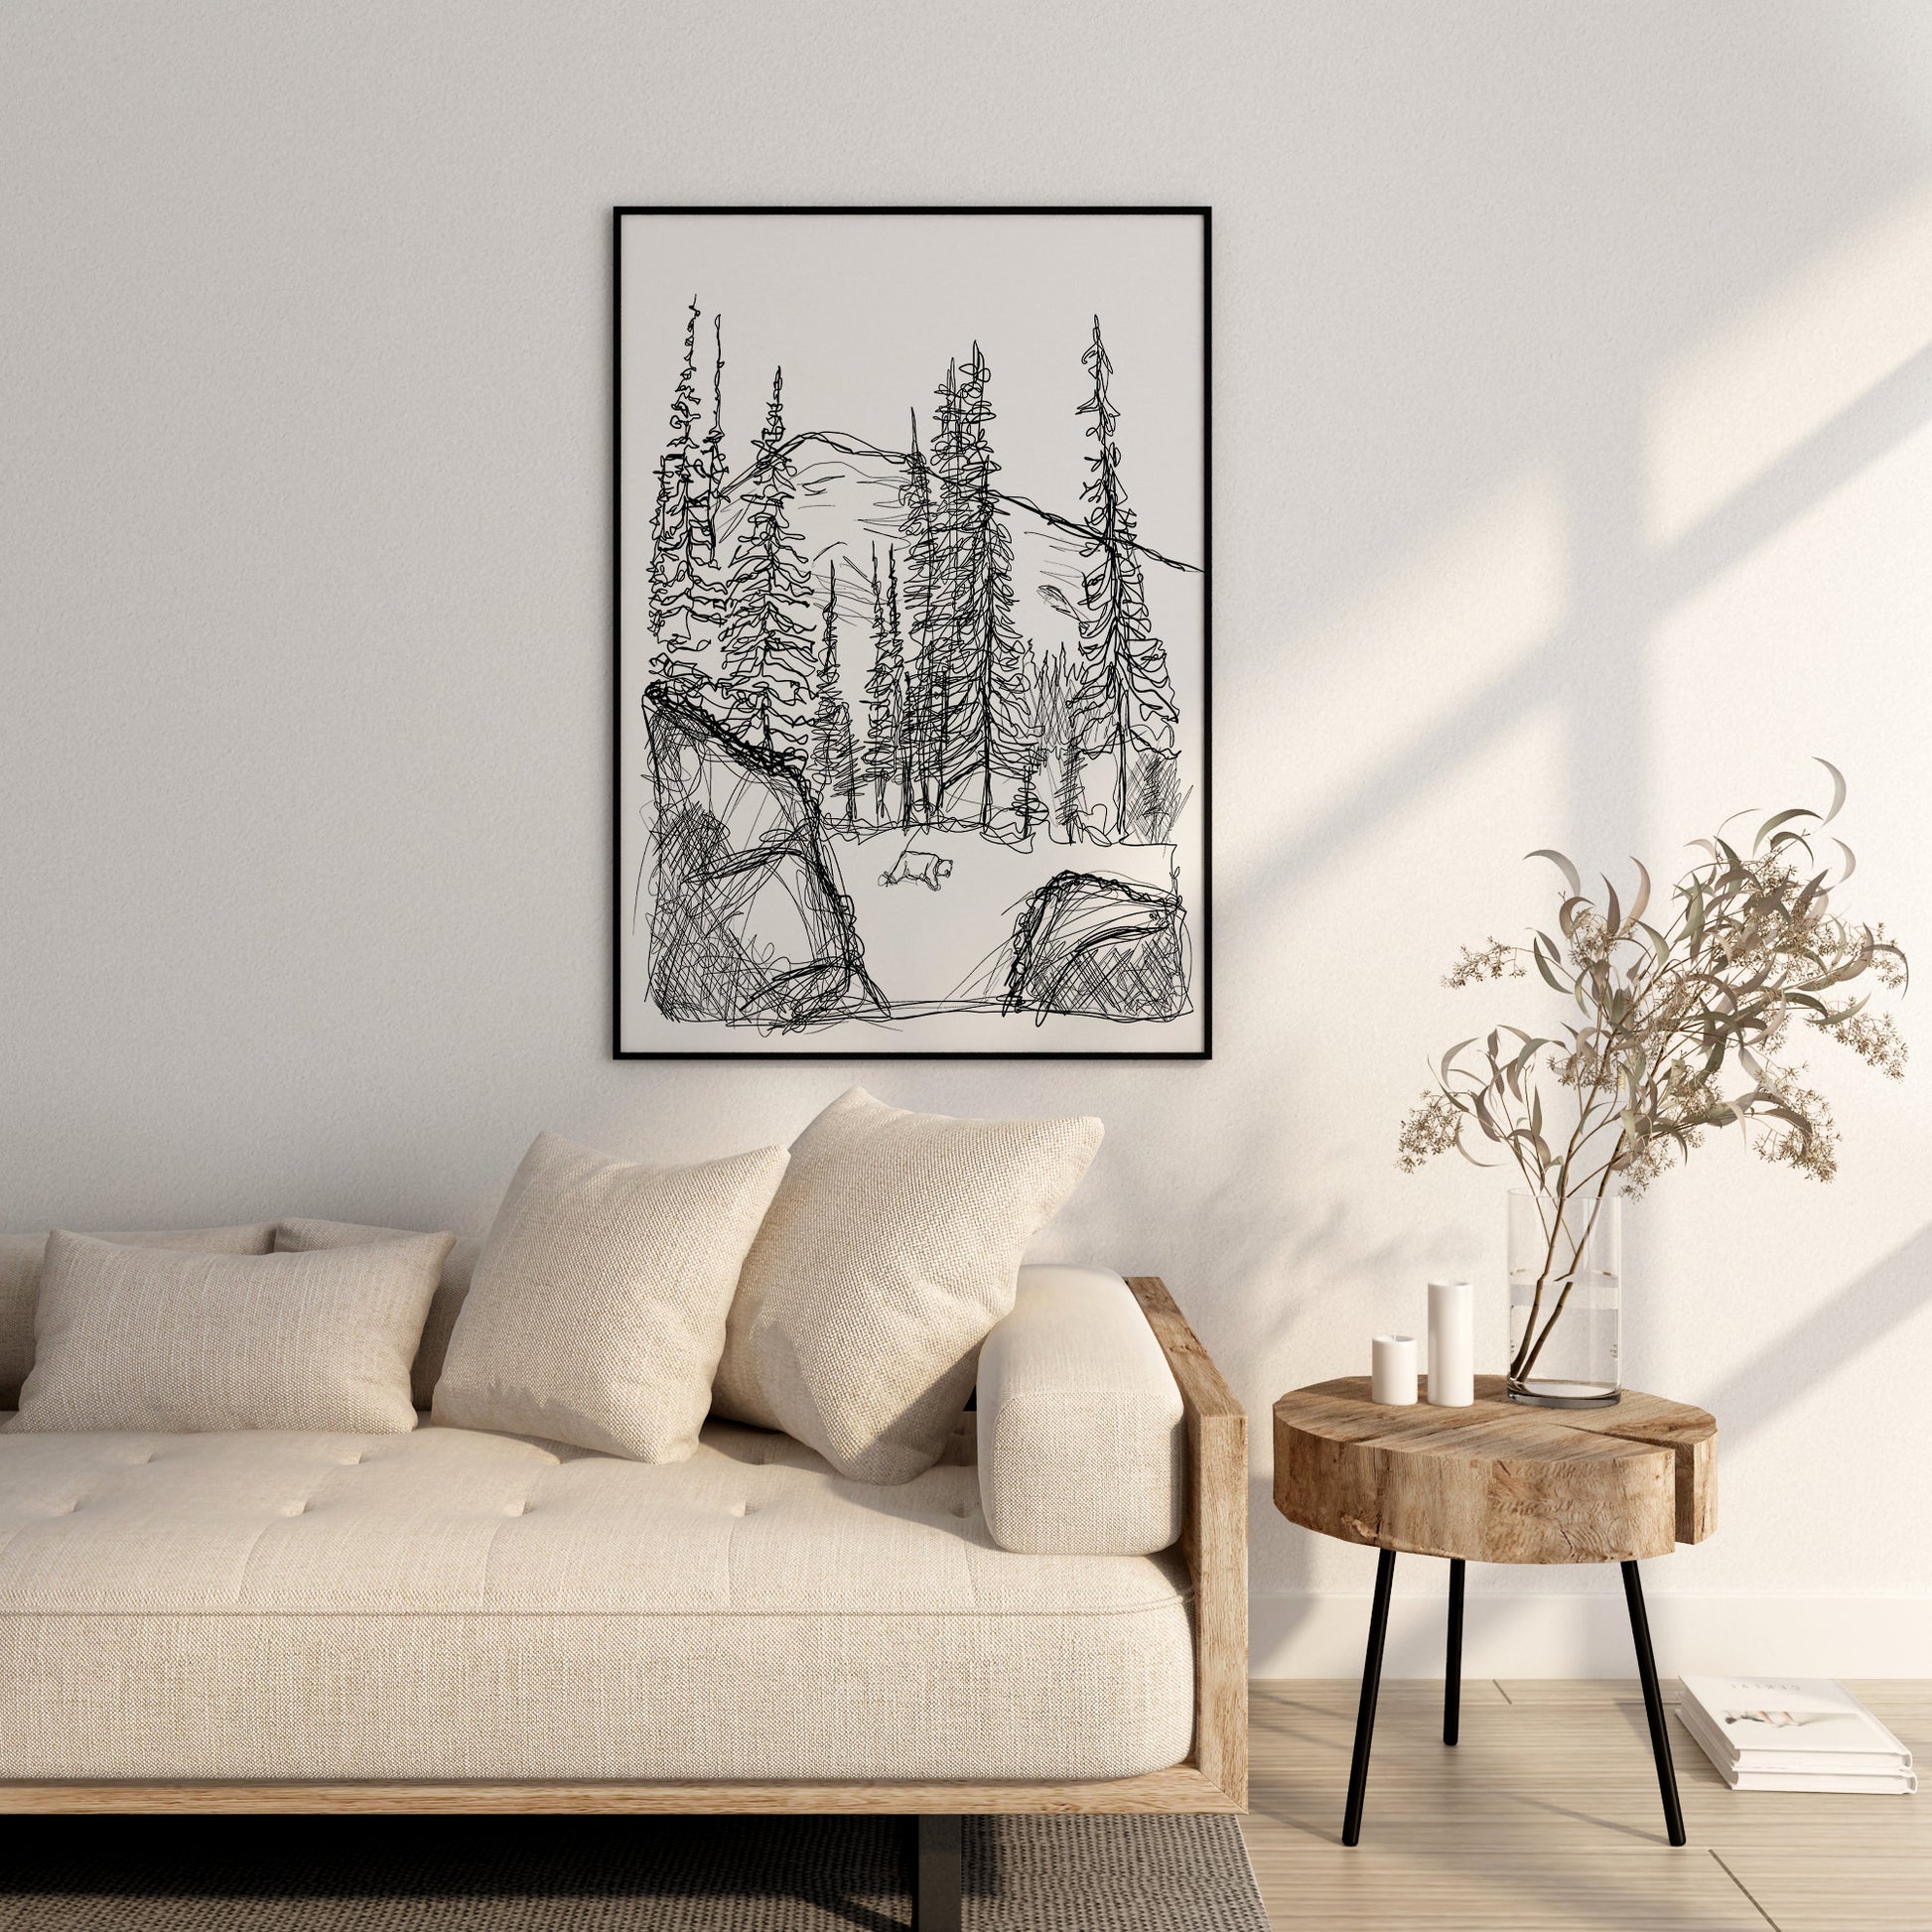 large black and white living room decor, artwork is line drawing of a bear in the mountains